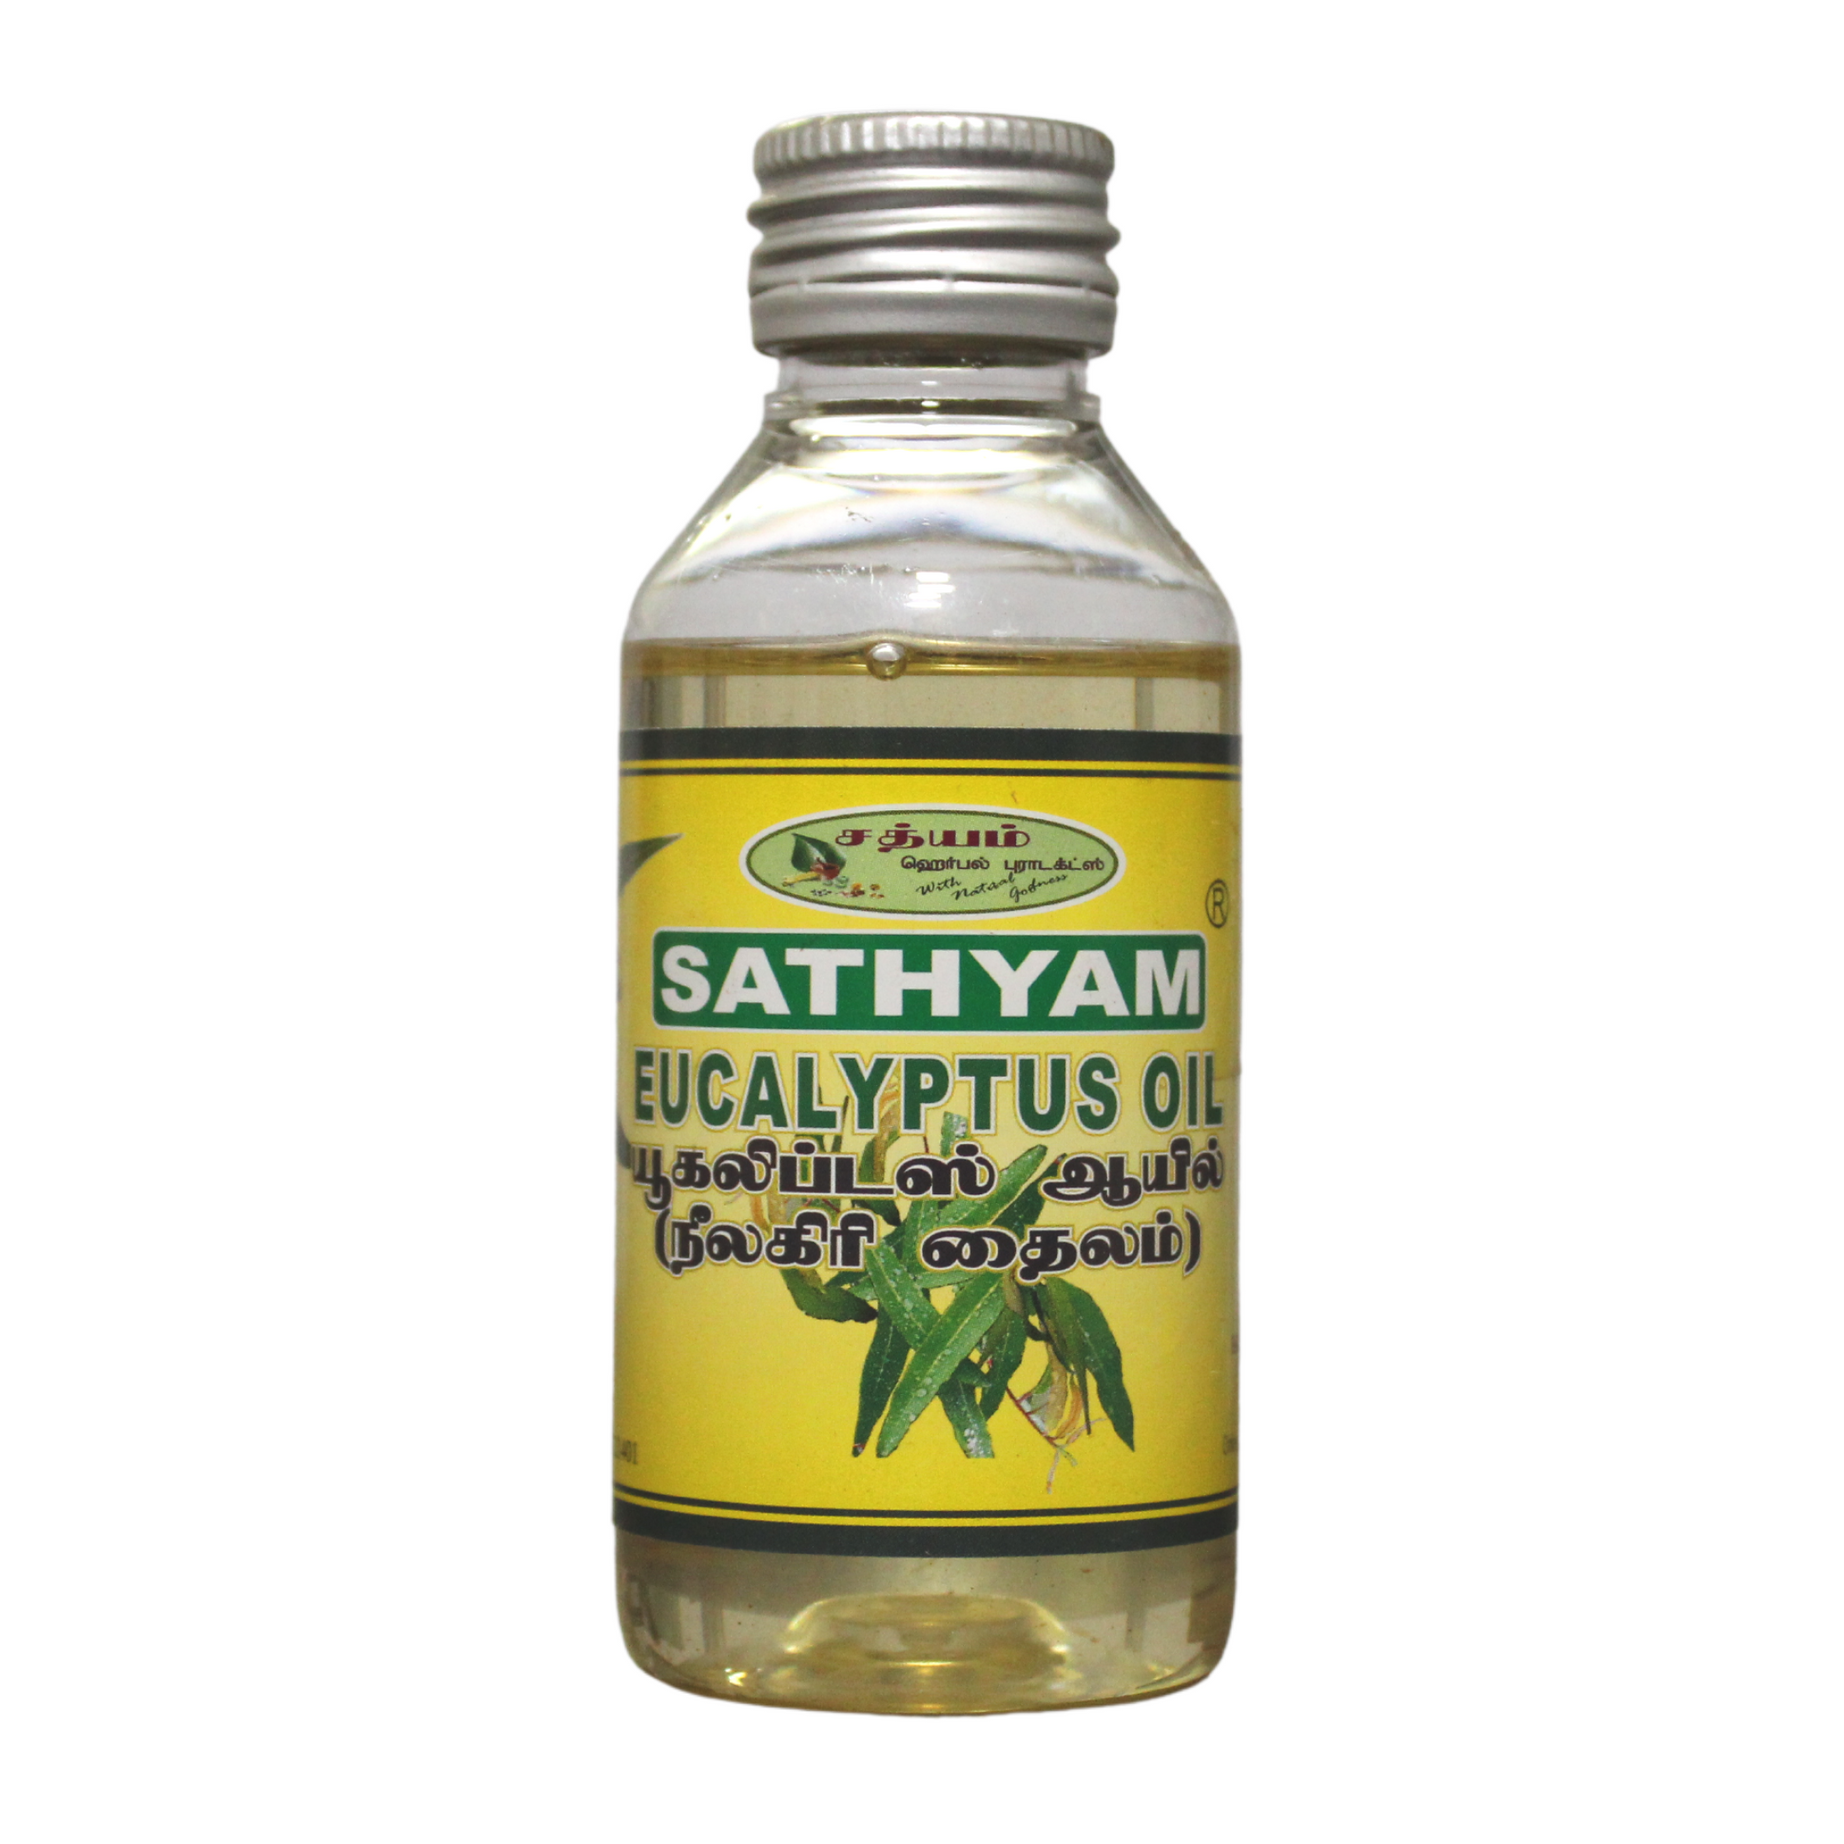 Shop Eucalyptus Oil - 100ml at price 245.00 from Sathyam Herbals Online - Ayush Care